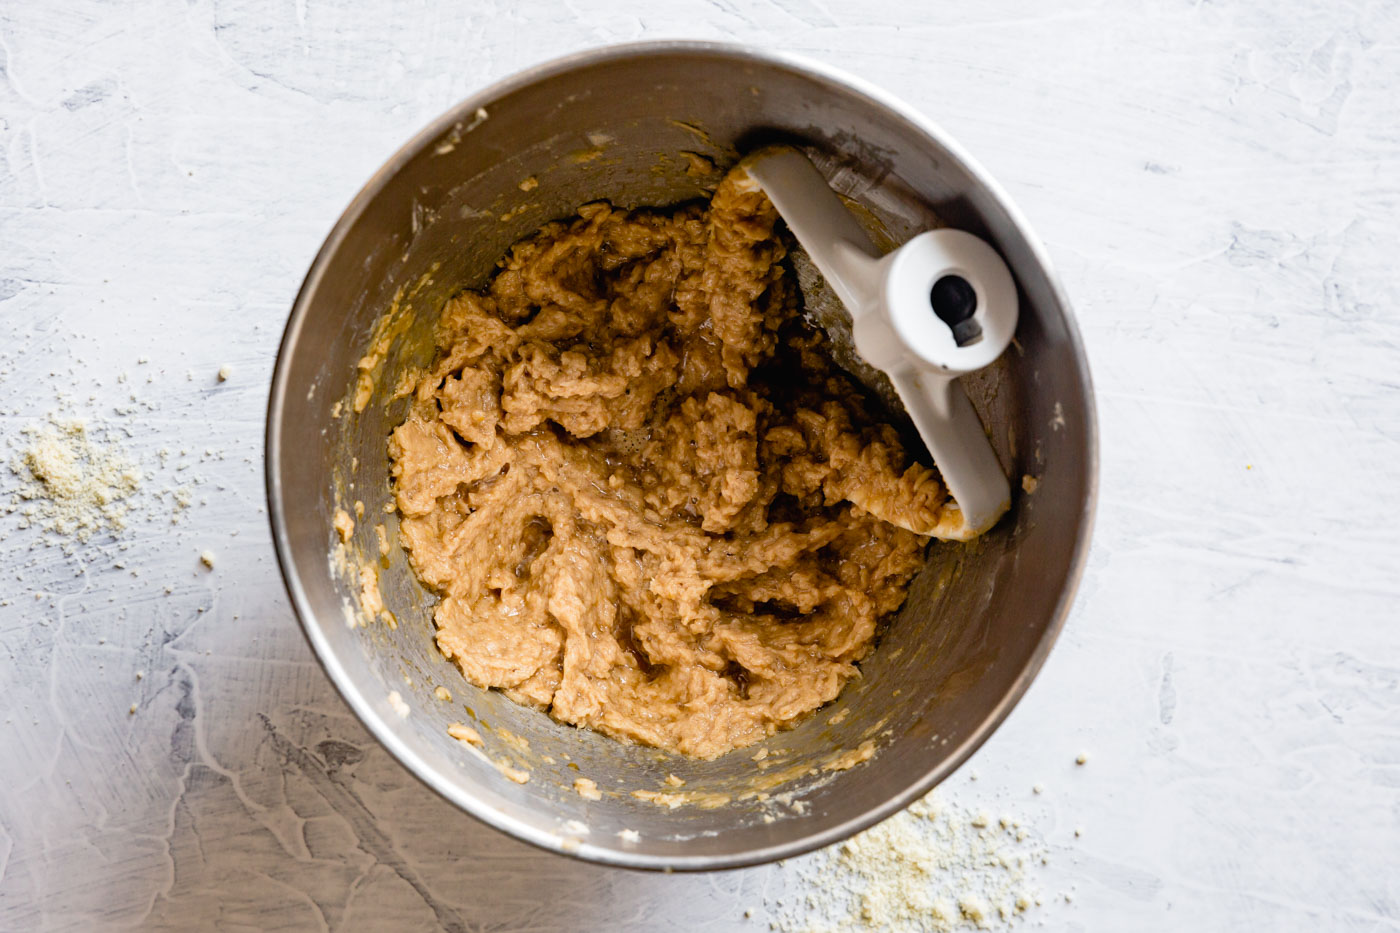 the egg-butter-sugar mixture is in the mixing bowl